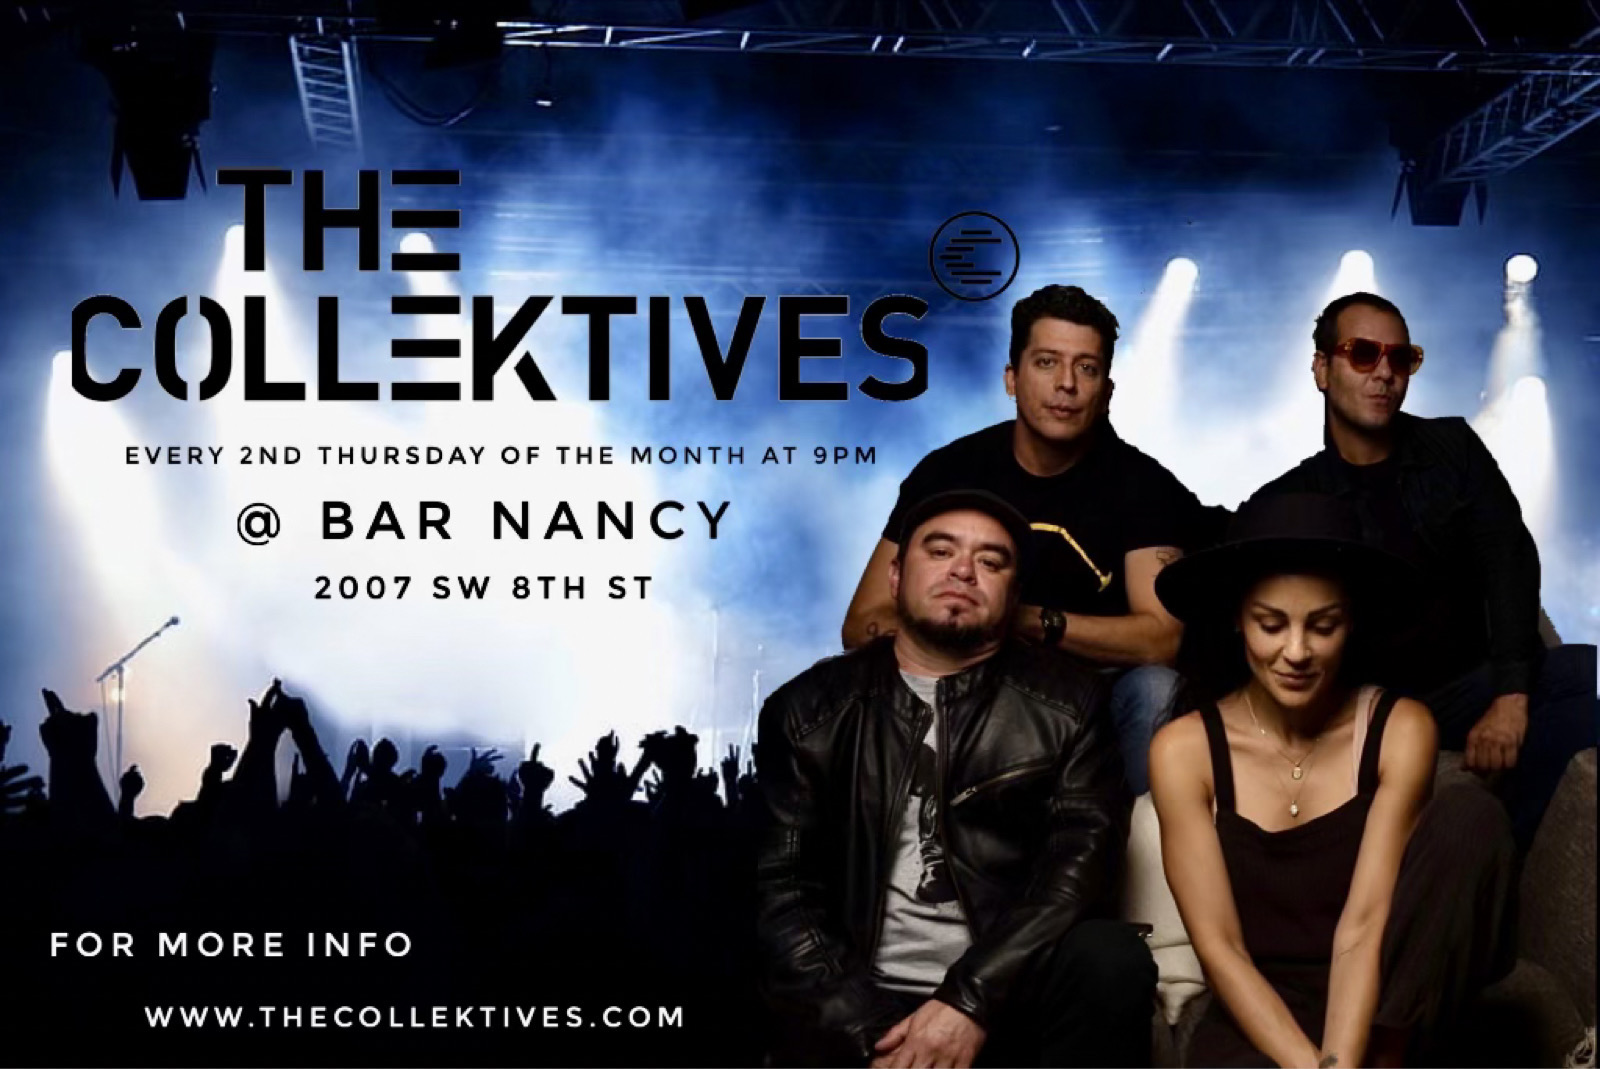 THE COLLEKTIVES AT BAR NANCY 2ND THURSDAYS OF THE MONTH